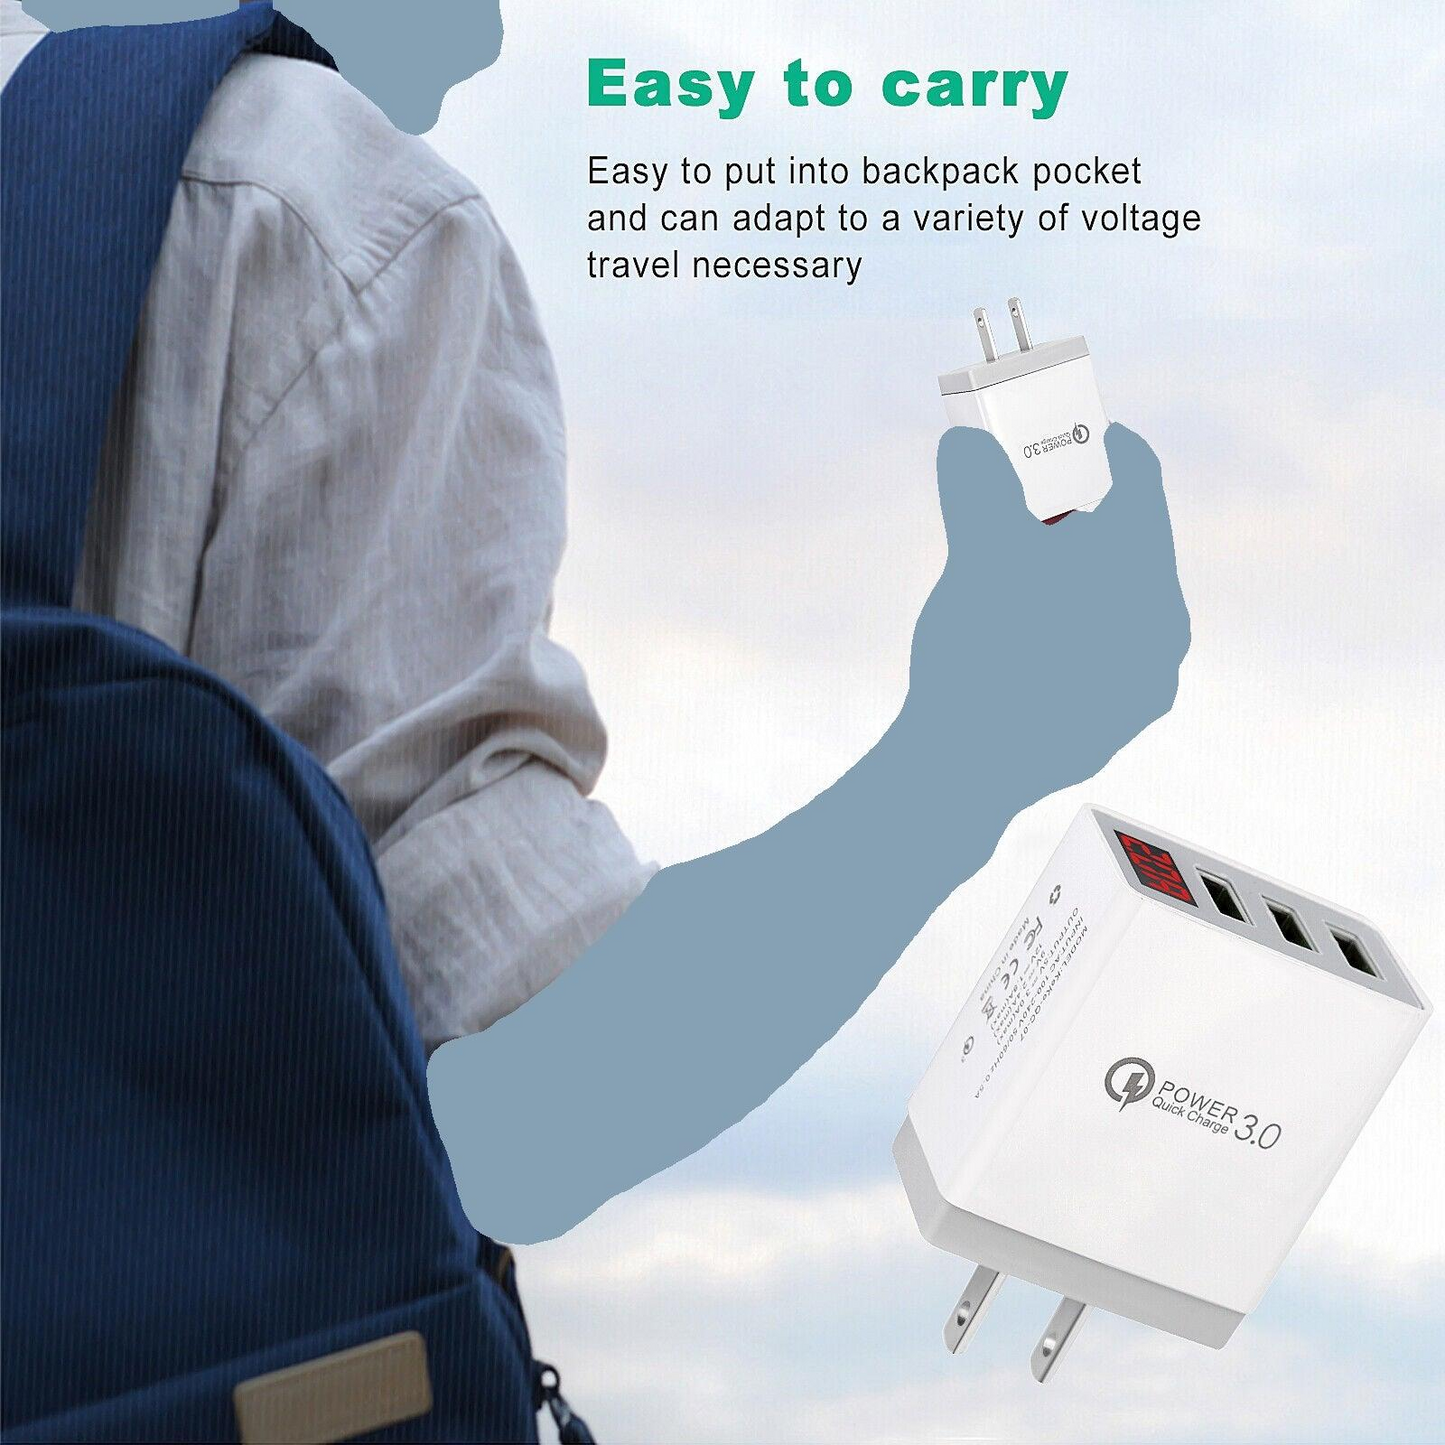 QC3.0 Multi-Port Universal Wall Charger and 10FT XL Charger Compatible for Iphone Cable Combo